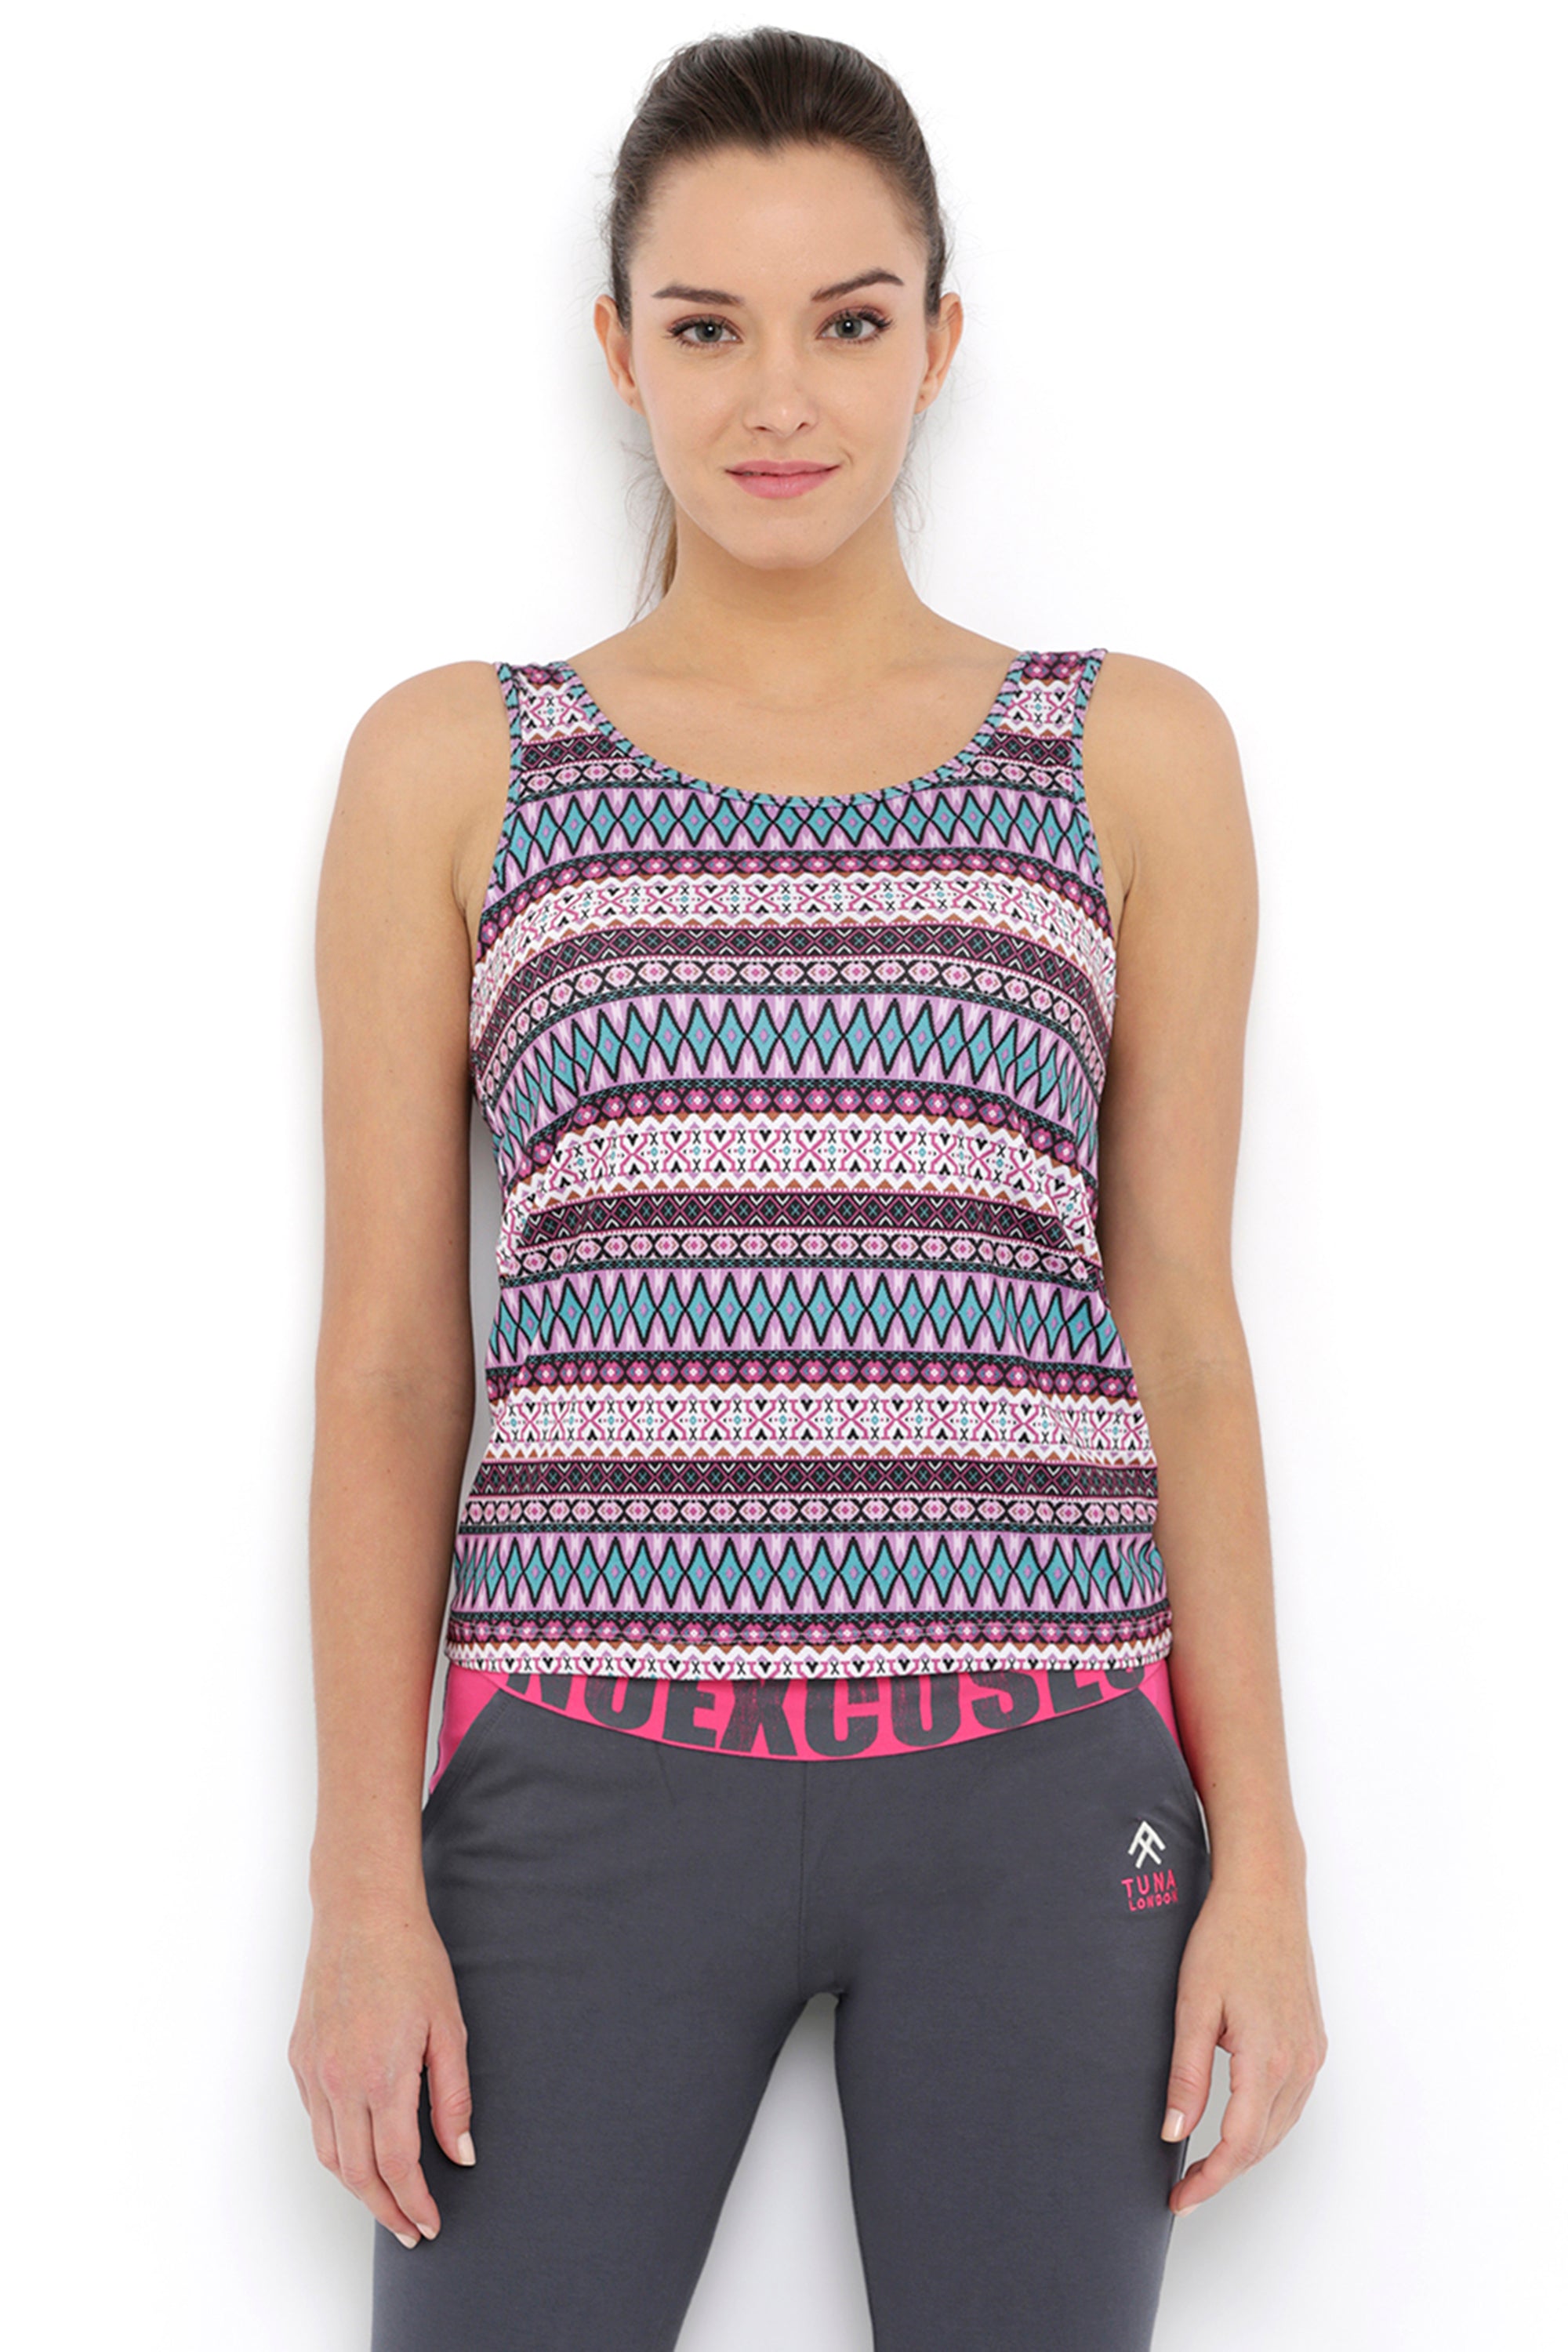 Multi-Print Sleeveless Tee With Built-In Bra Cups BT70